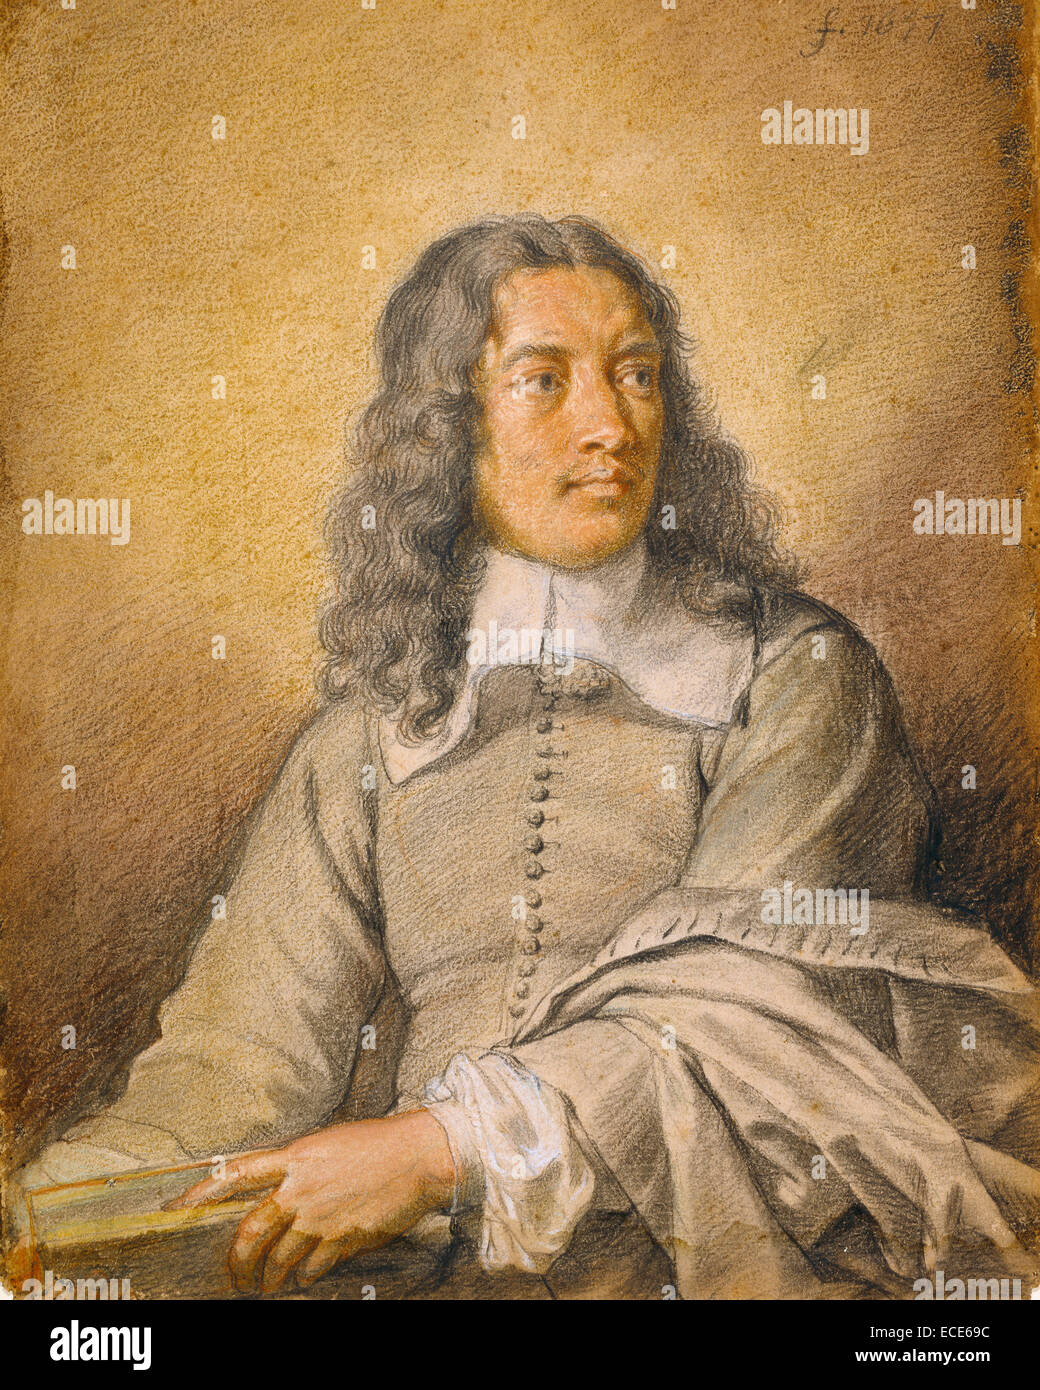 Portrait of M. Quatrehomme du Lys; Charles Le Brun, French, 1619 - 1690; 1657; Black, white, and red chalk and pastel; 35.2 x 27.6 cm (13 7/8 x 10 7/8 in.) Stock Photo